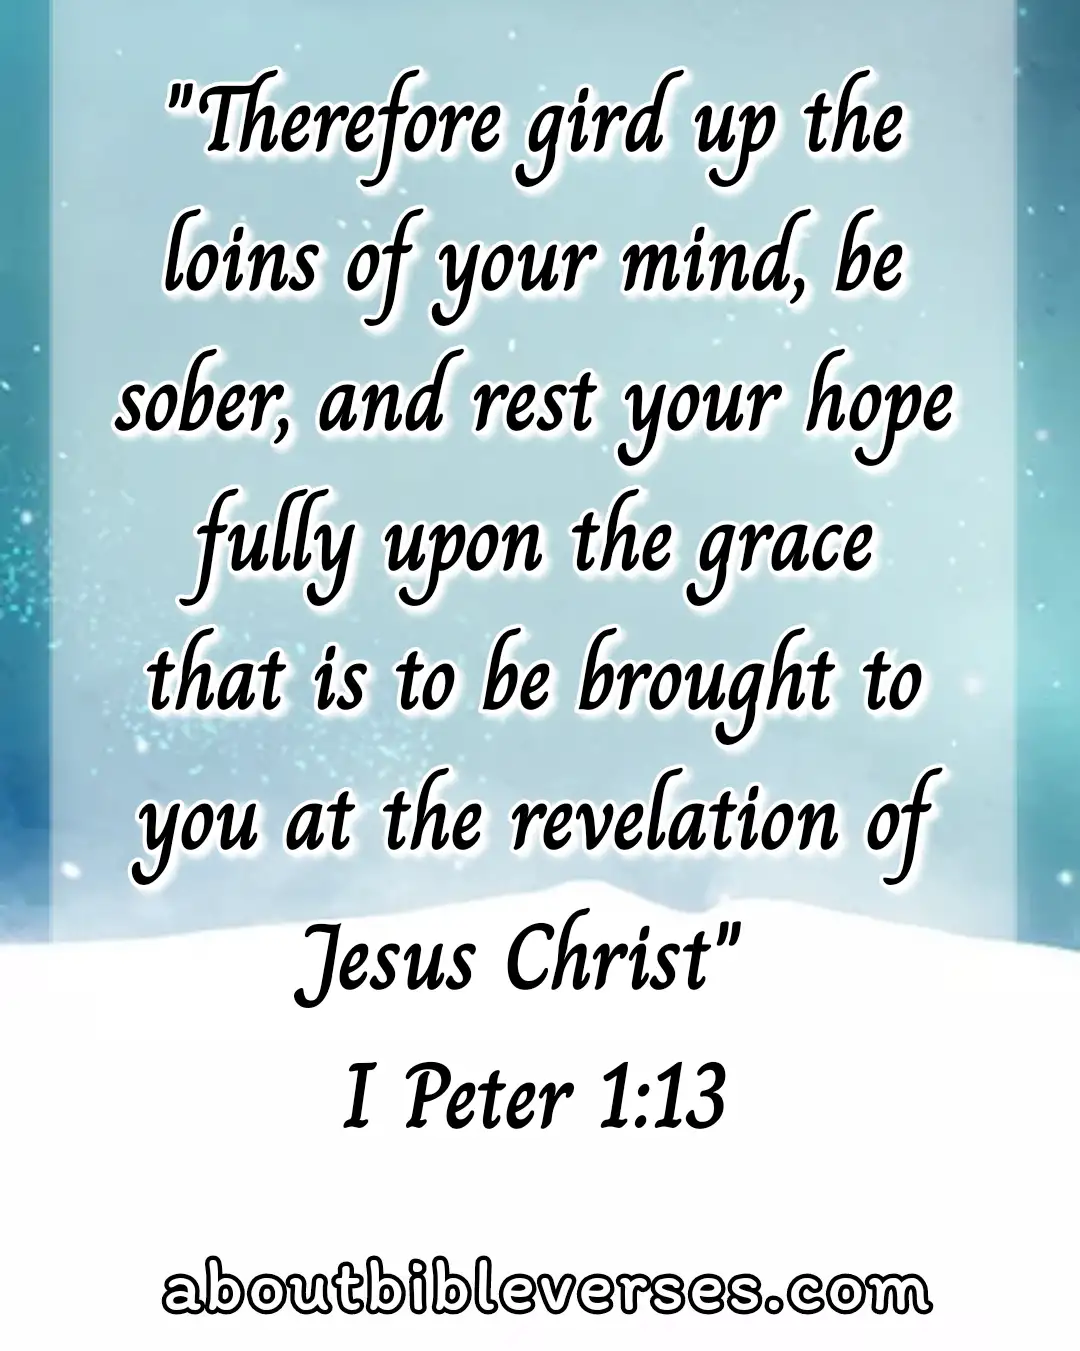 Bible Verse About Filling Your Mind With Good Things (1 Peter 1:13)